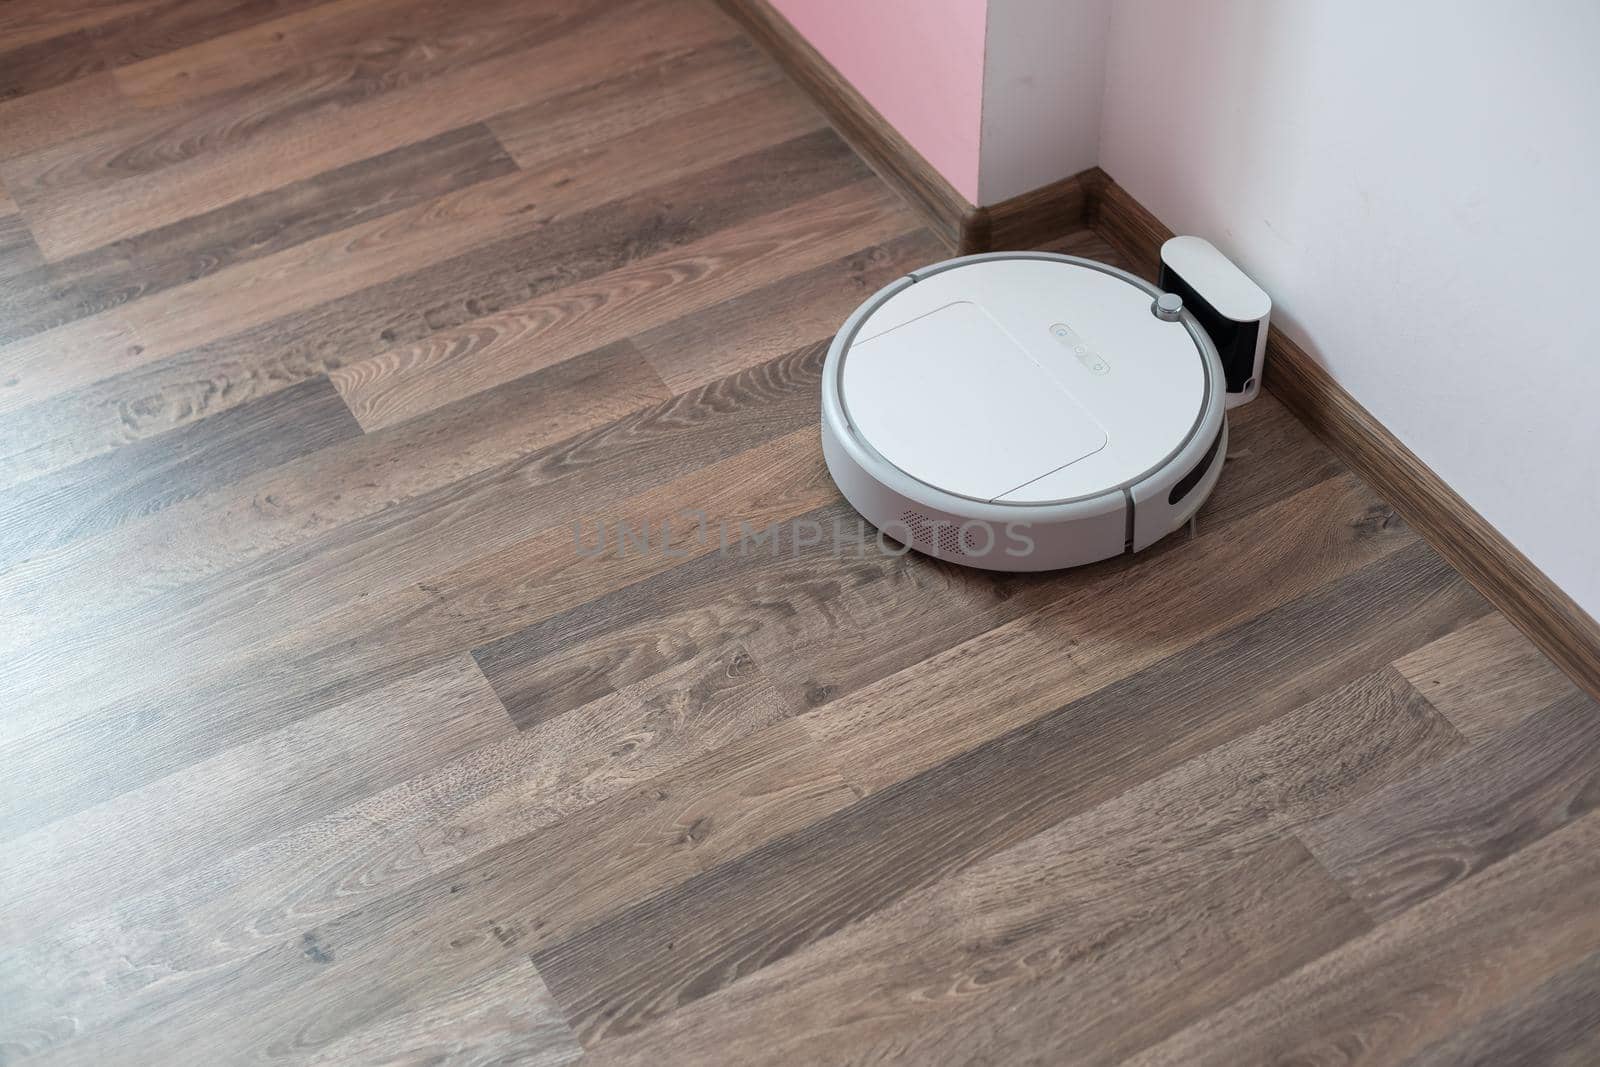 Robotic vacuum cleaner on laminate wood floor charging from base station. Smart cleaning technology. robot vacuum cleaner return to charging at dock in clean room floor by Andelov13